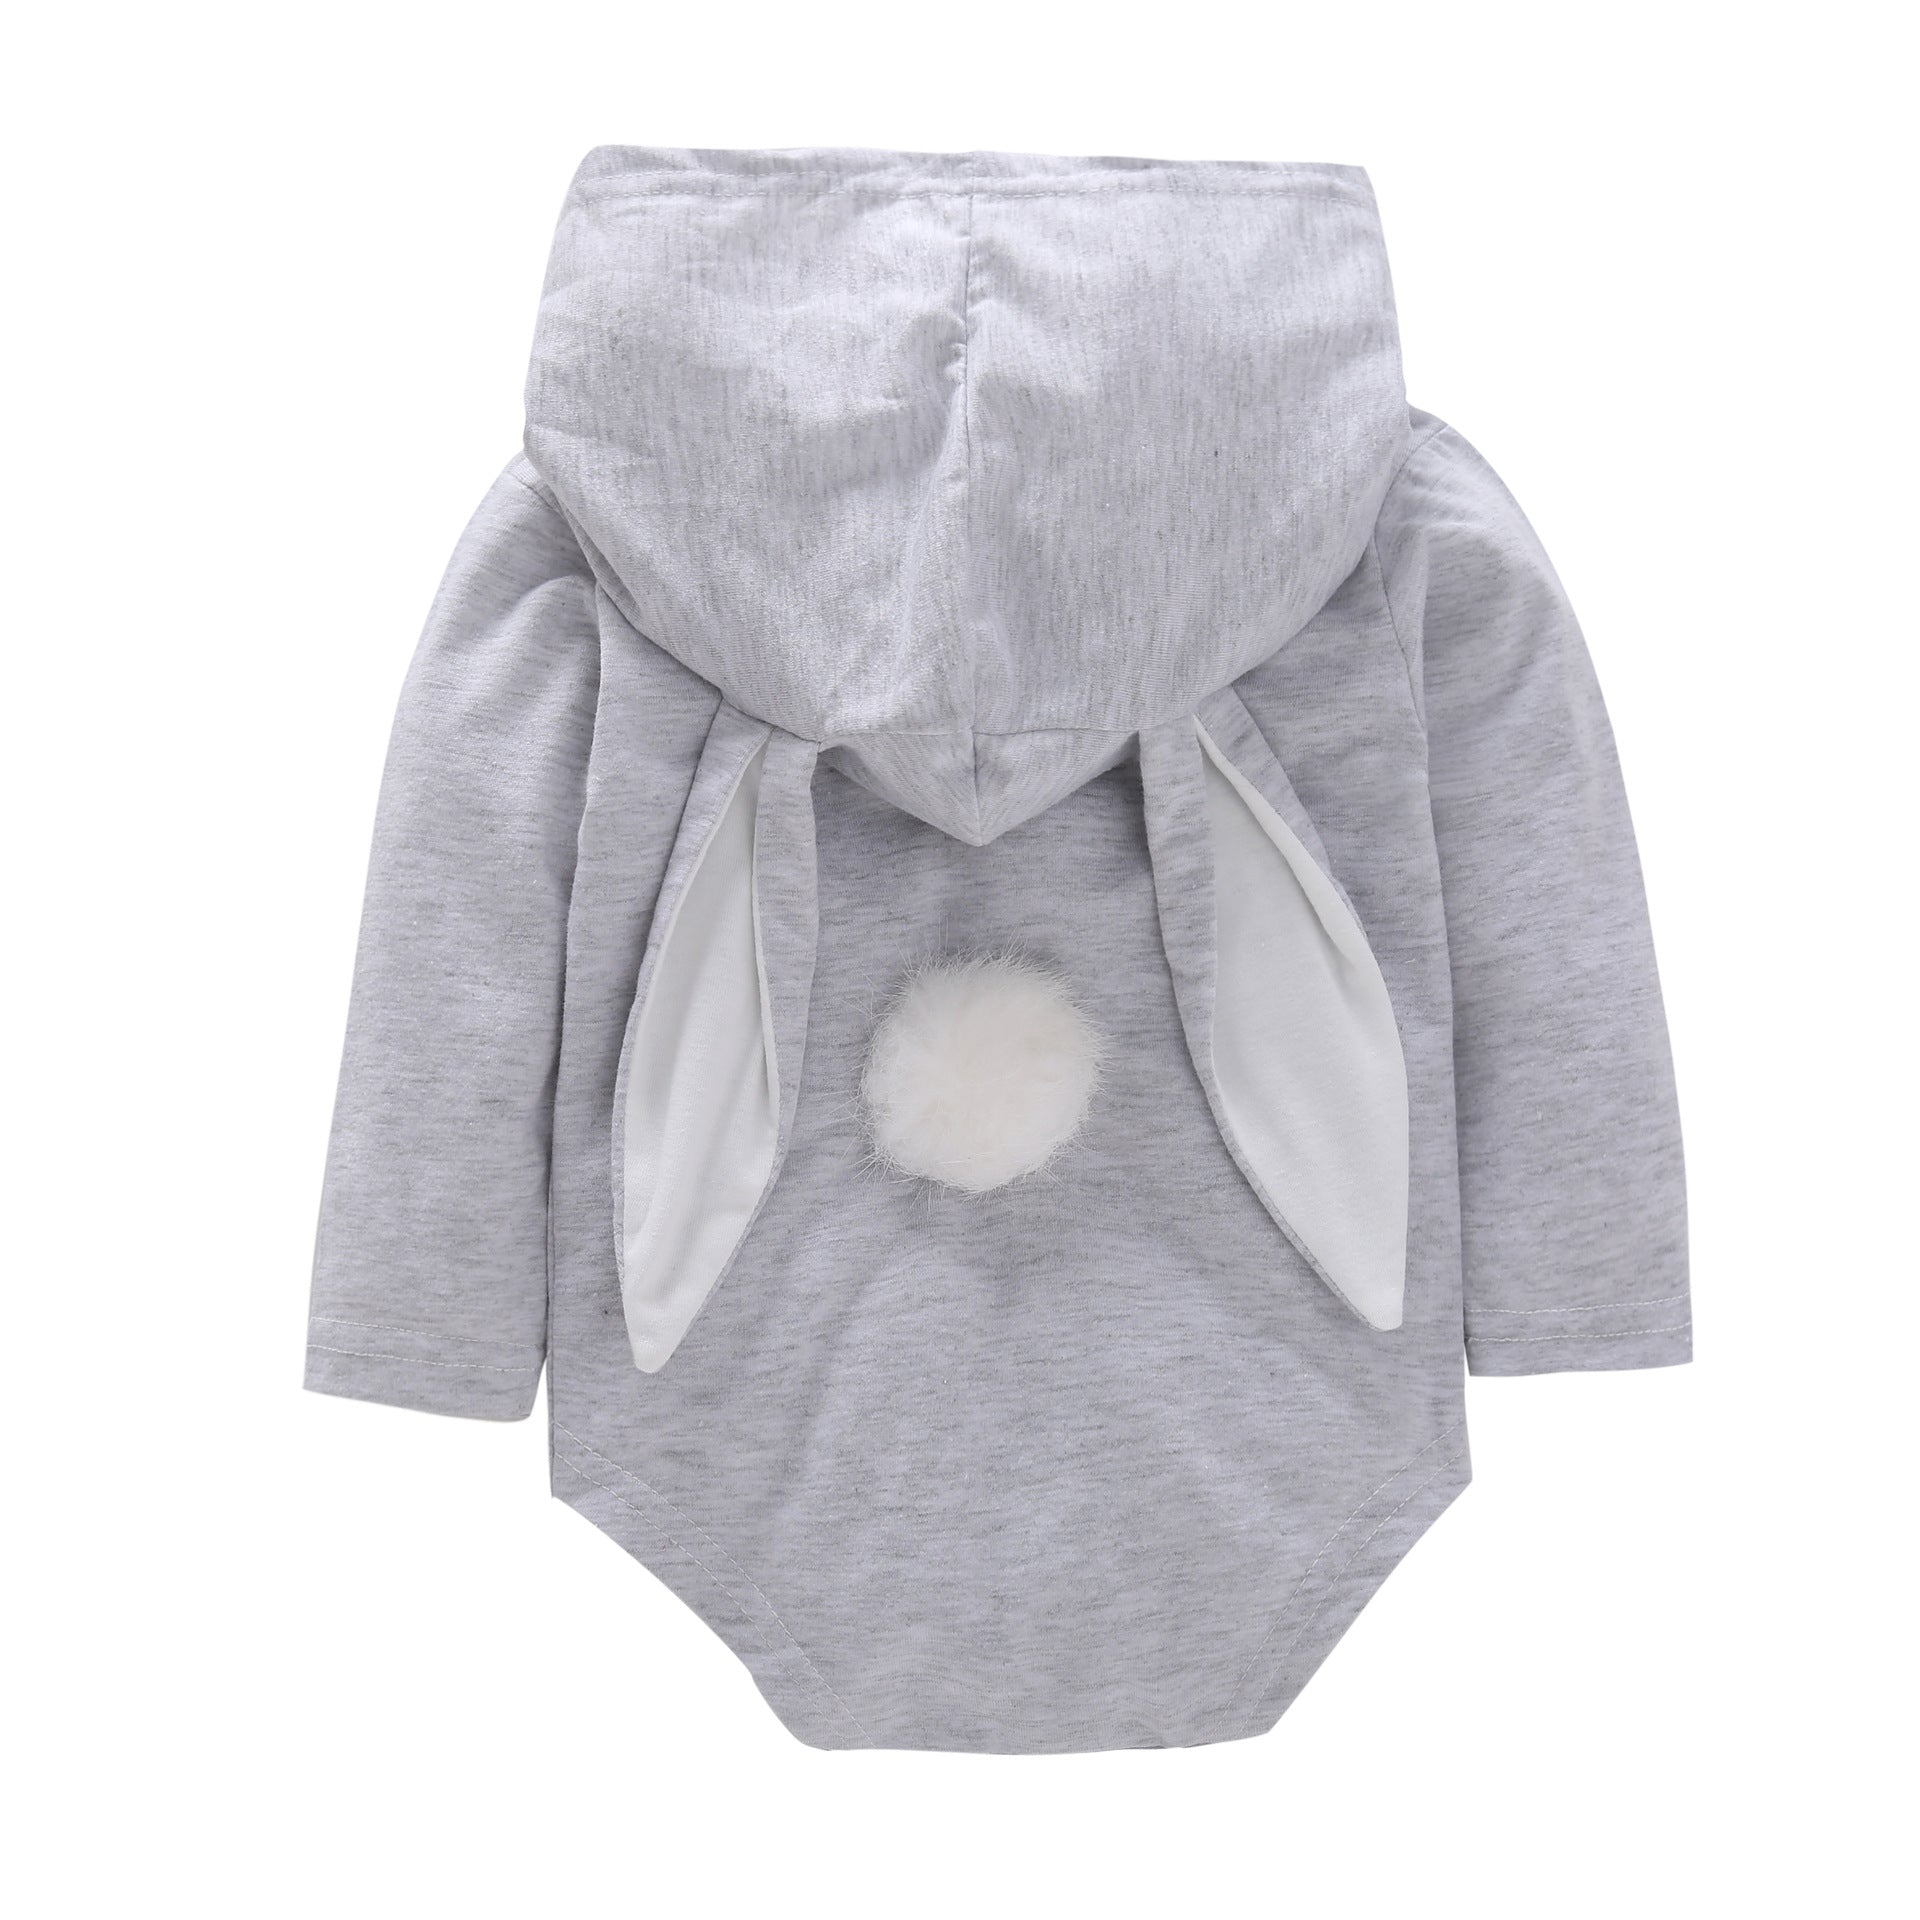 Hooded Baby's Easter Long Ears Bunny Suit